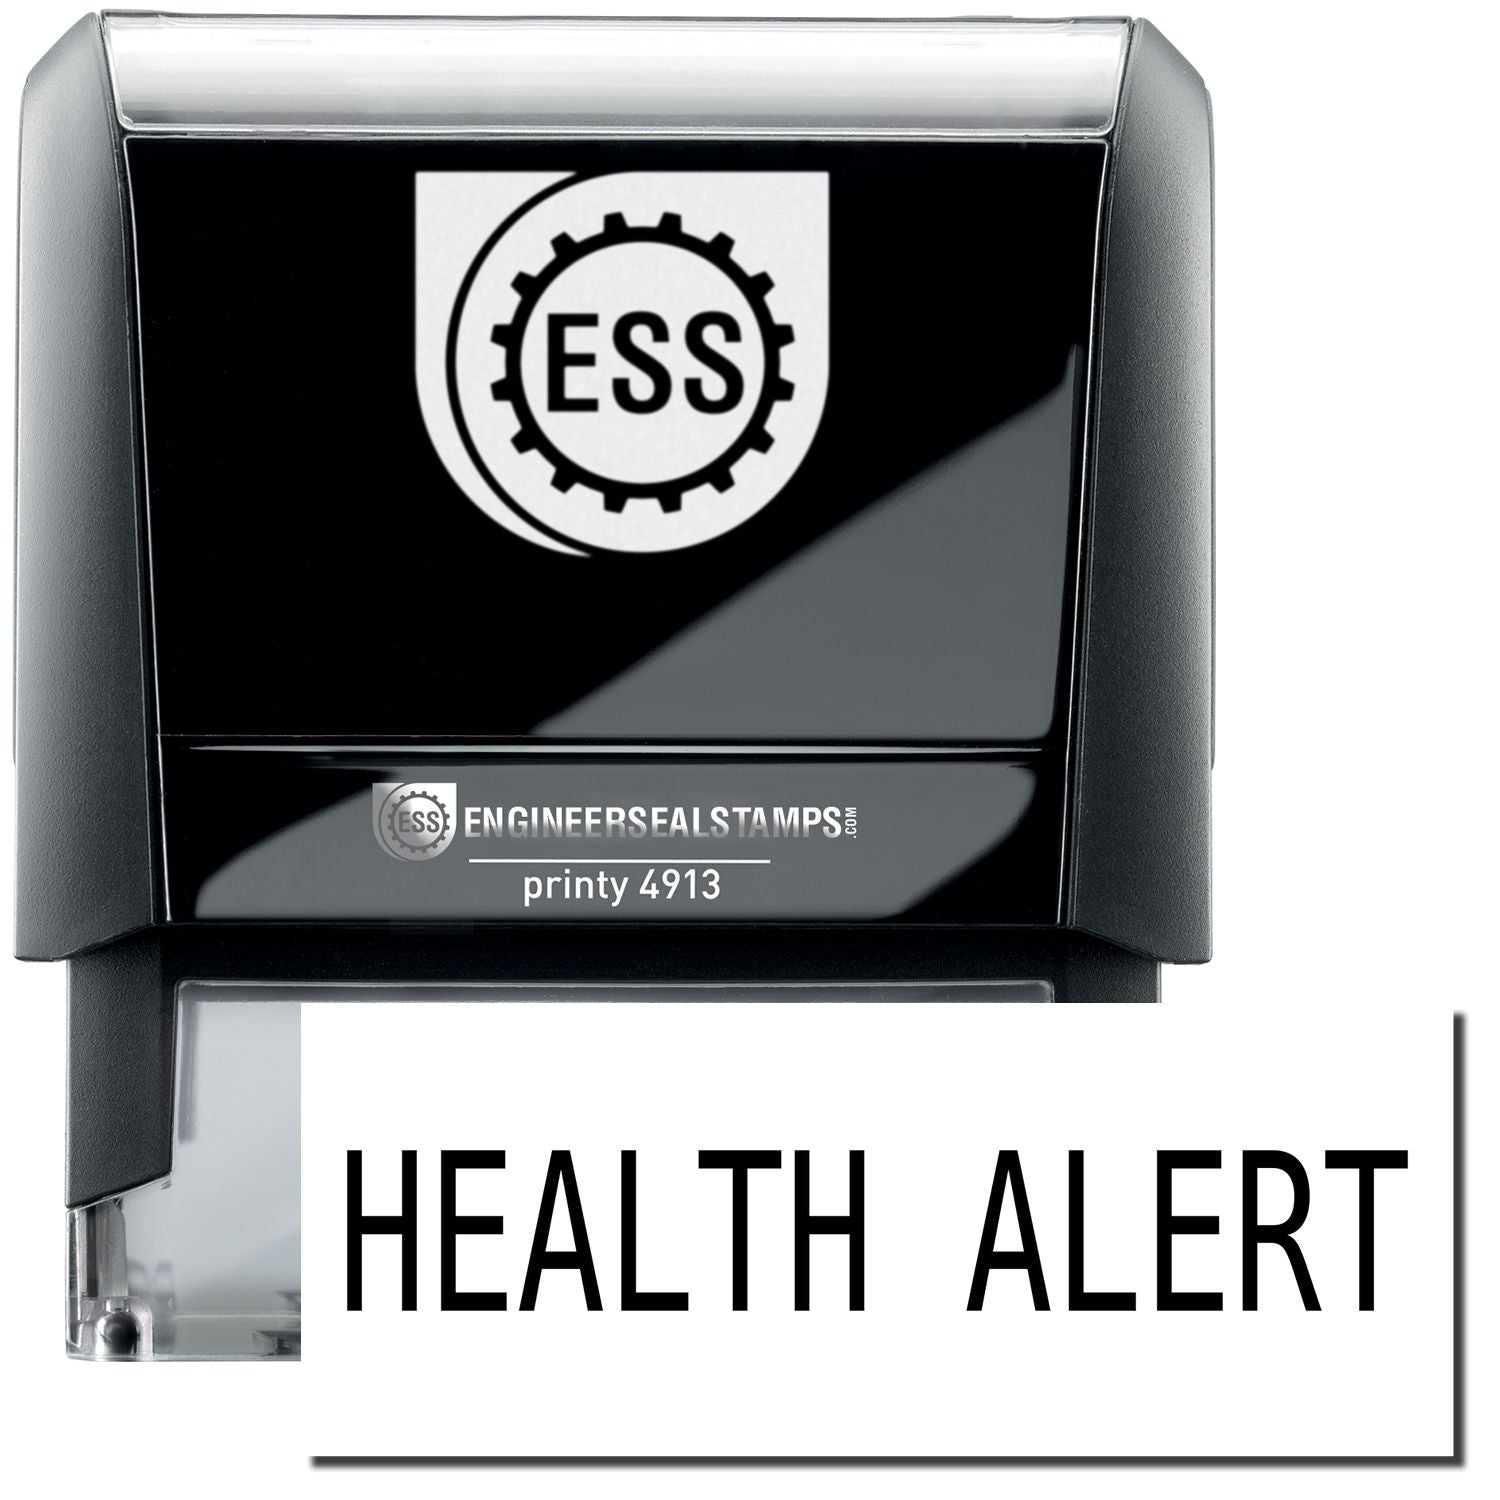 A self-inking stamp with a stamped image showing how the text "HEALTH ALERT" in a large bold font is displayed by it.